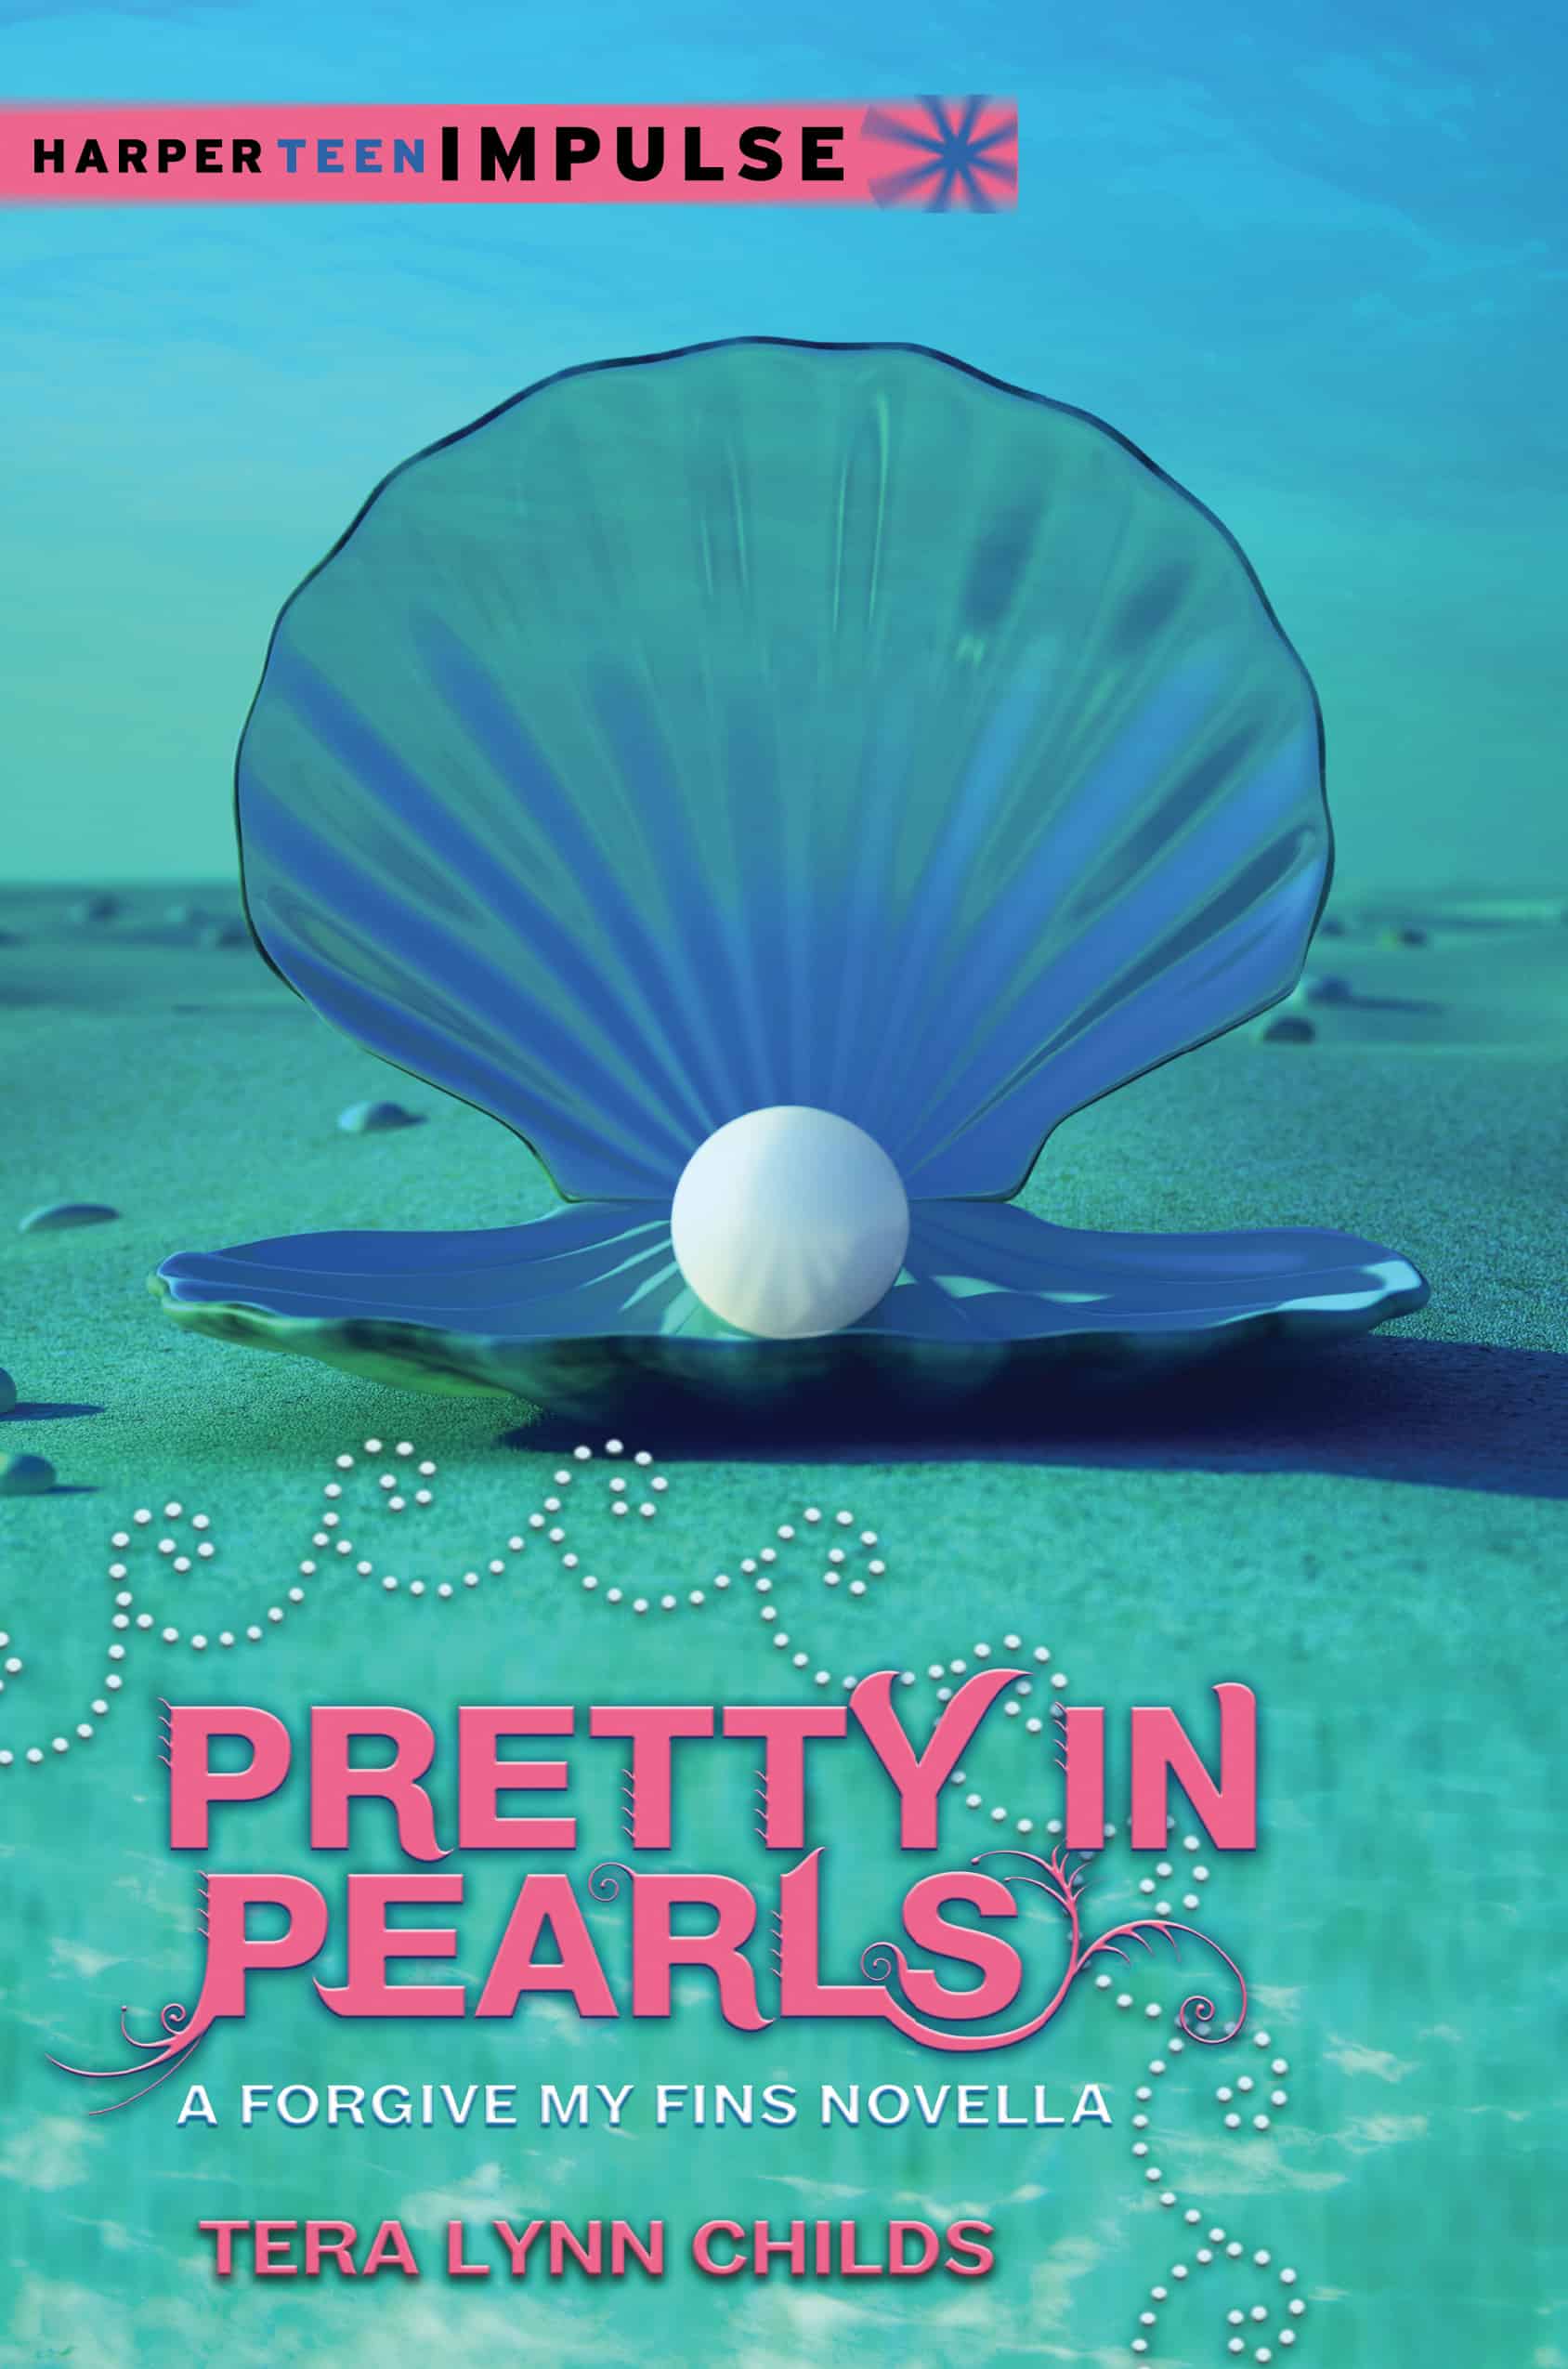 http://teralynnchilds.com/books/pretty-in-pearls/